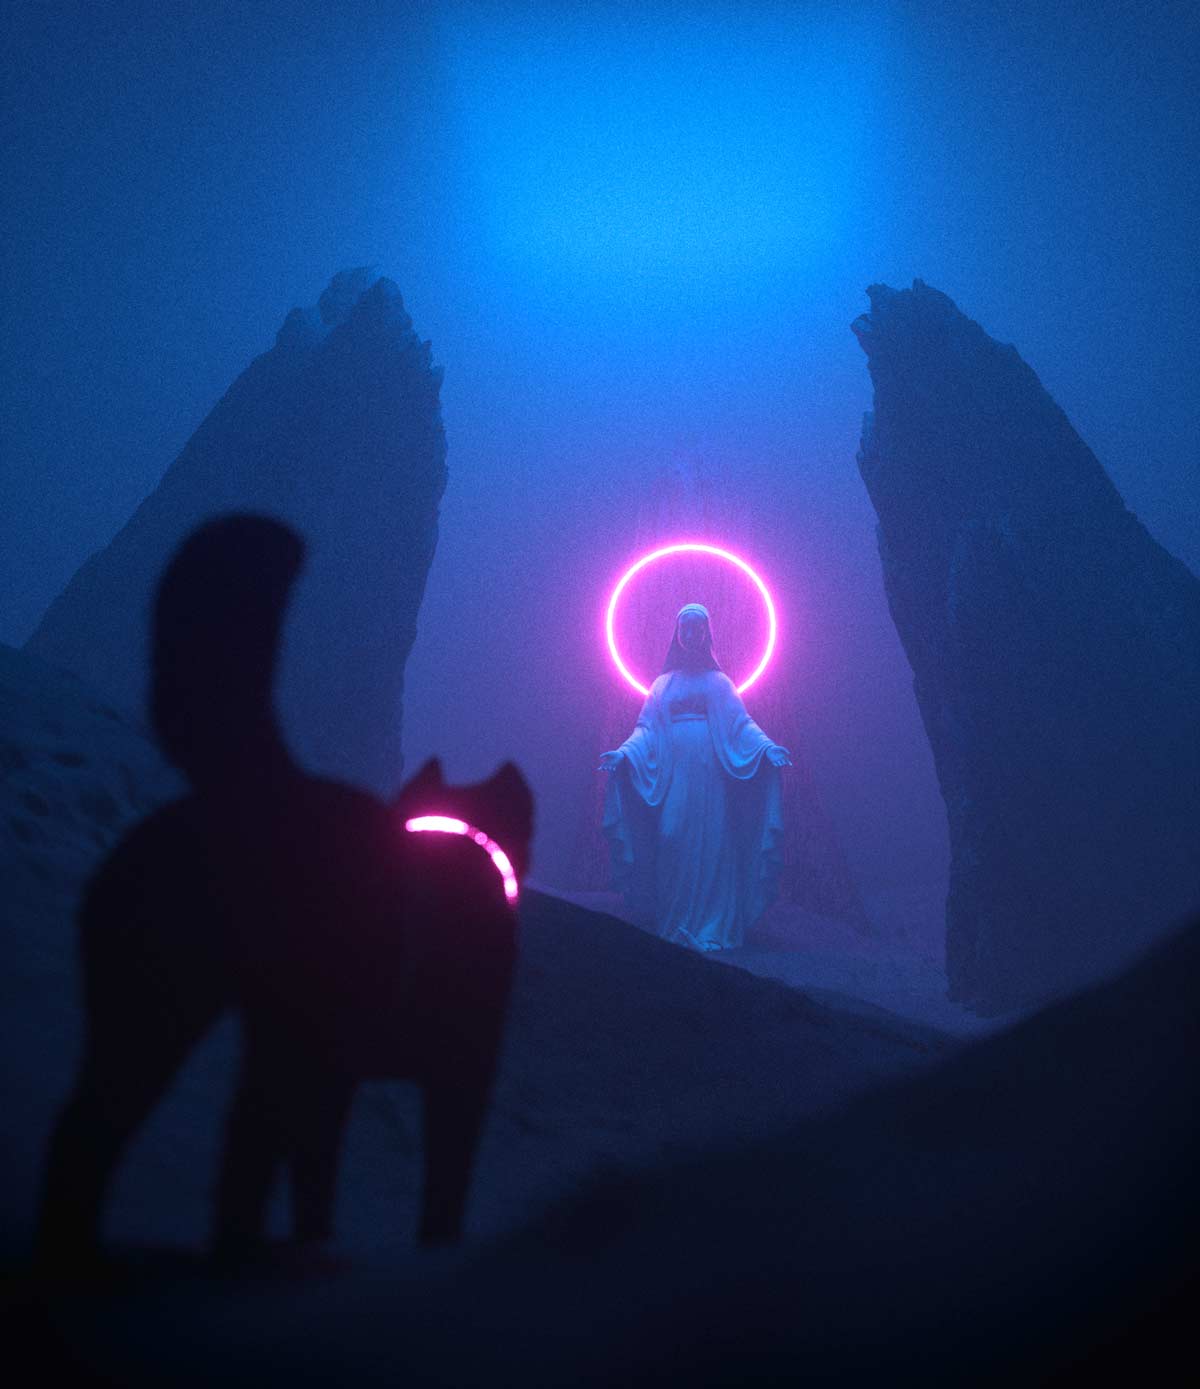 Daily Render